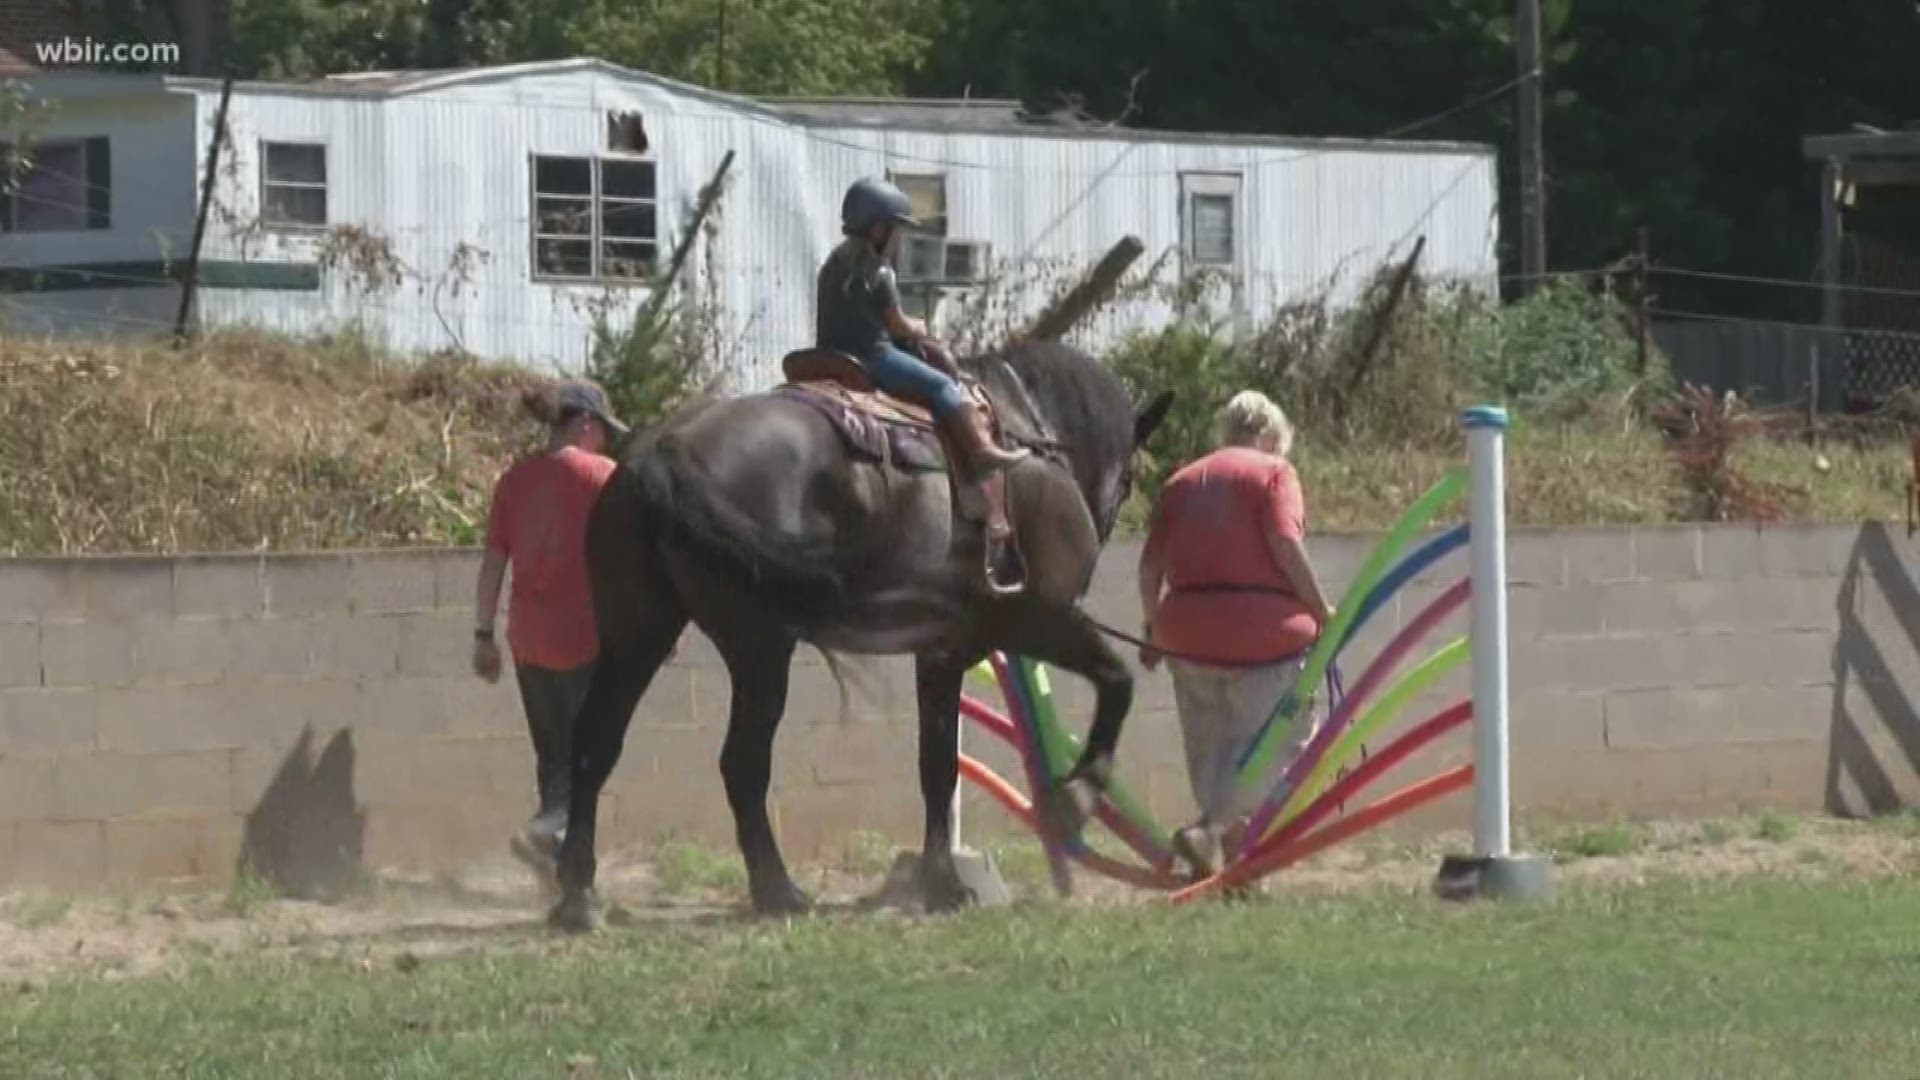 The obstacle course is a fun new initiative to bring awareness to horse adoptions and a chance for horses and their riders to bond.